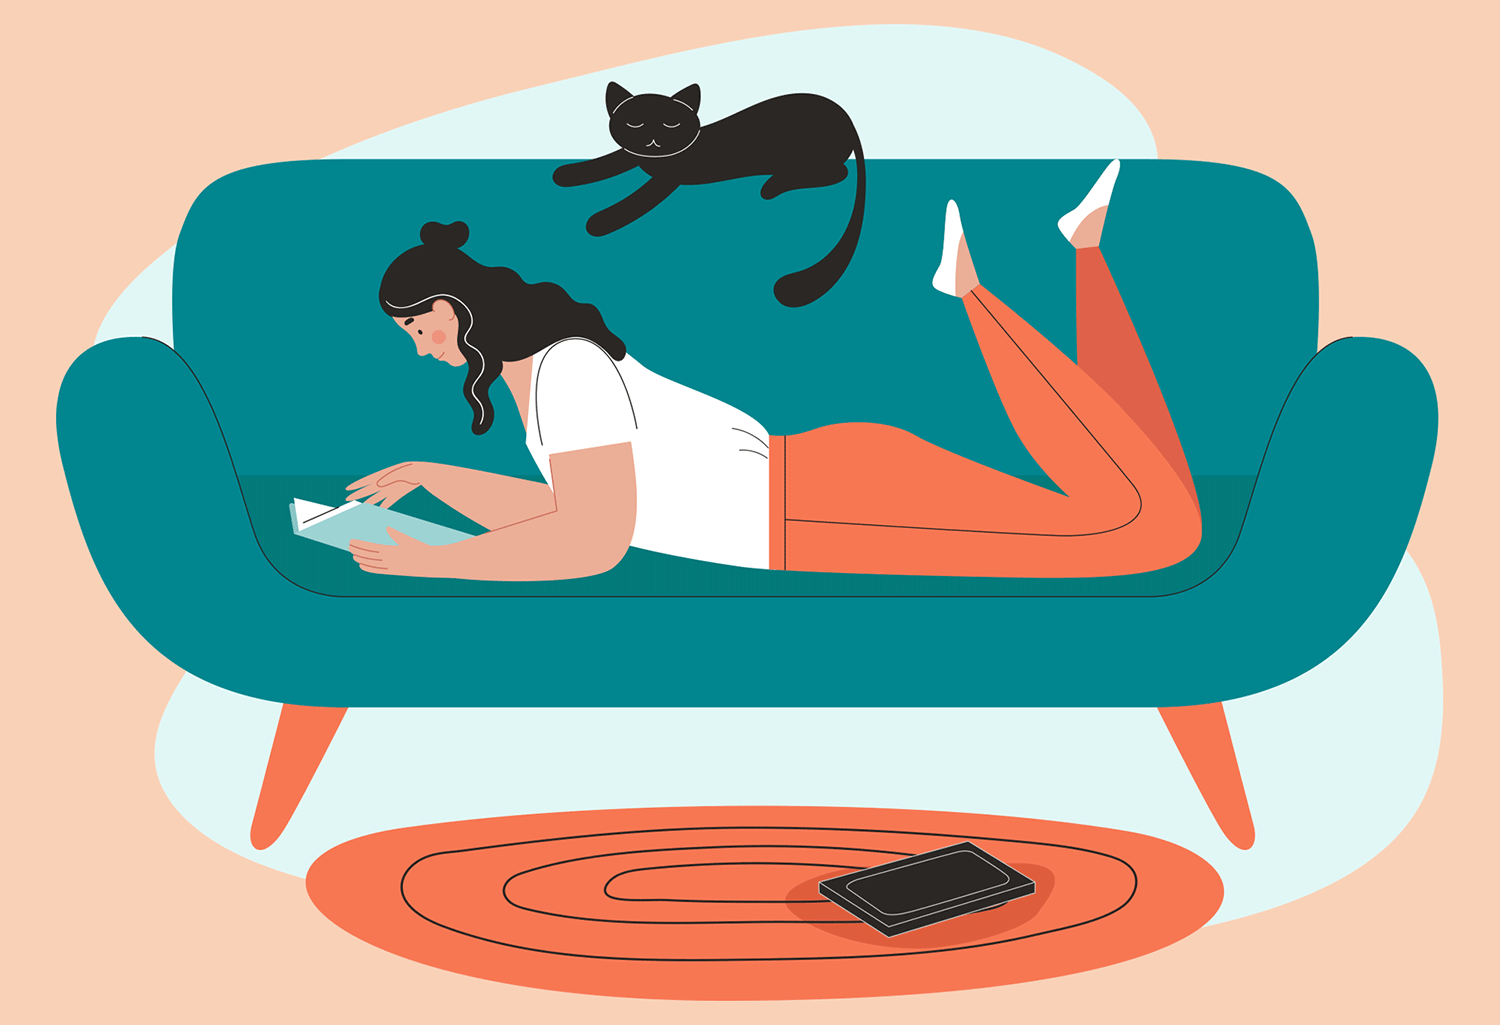 Animation of a girl lying on her couch with a book and ignoring her phone